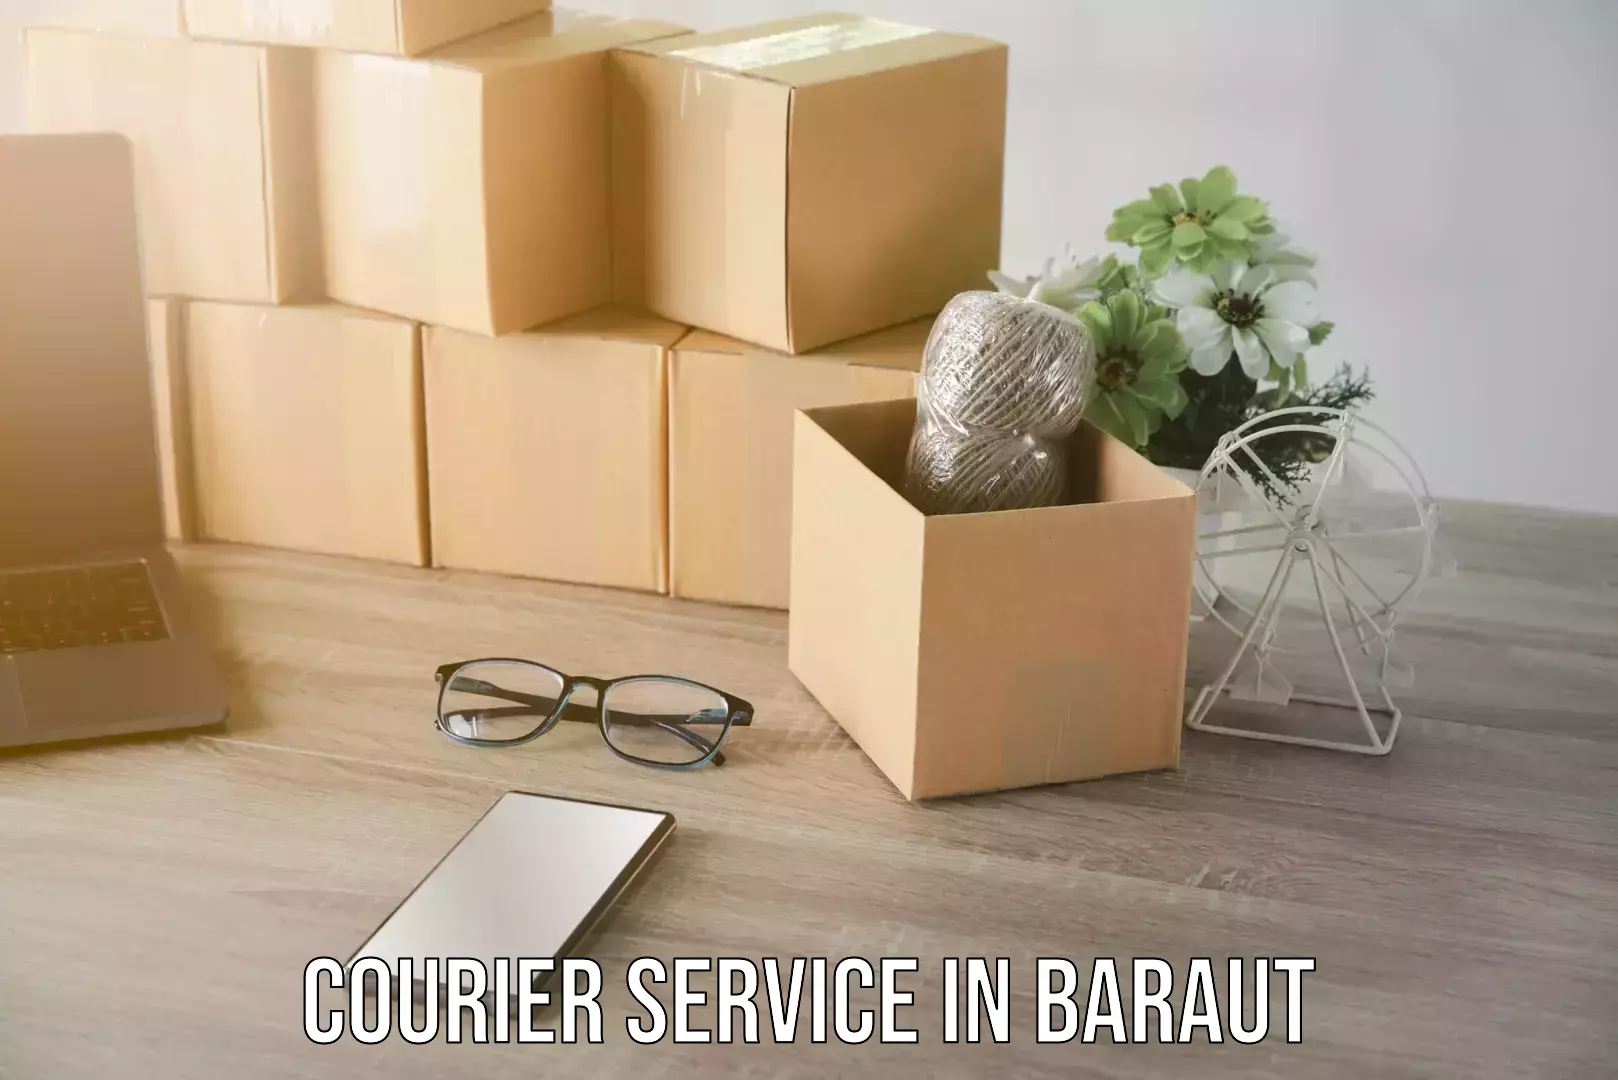 Customer-friendly courier services in Baraut